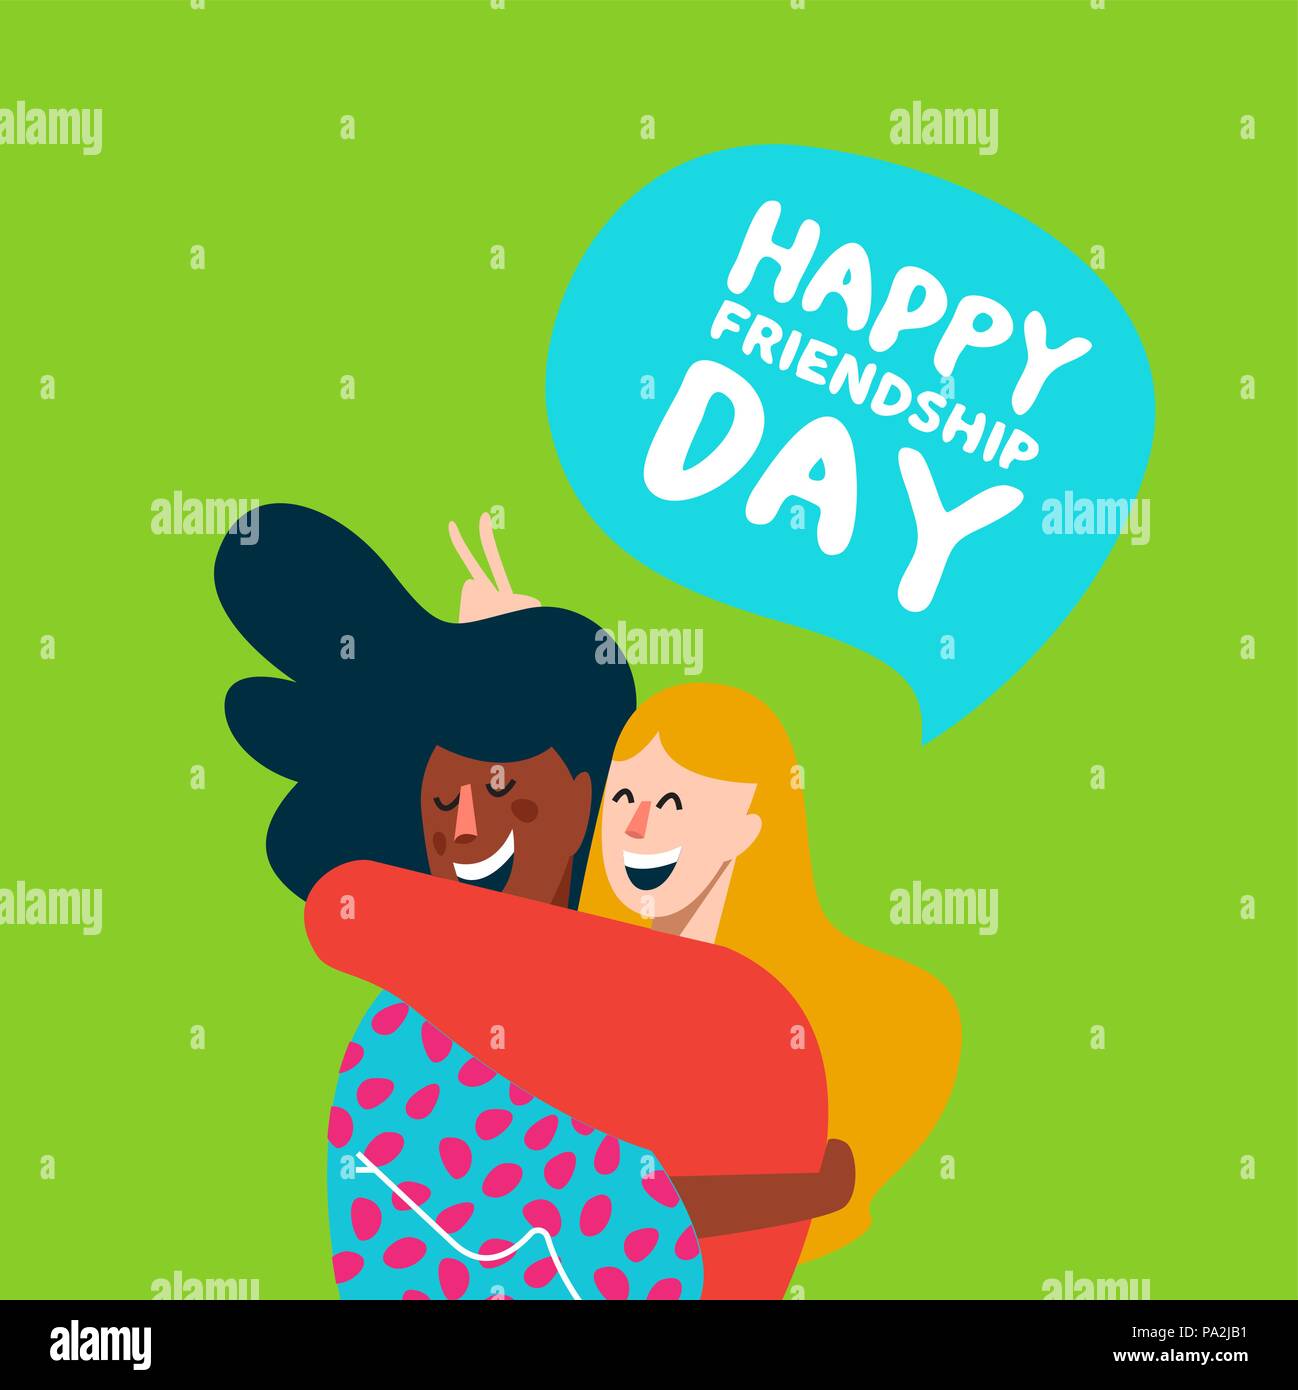 Happy friendship day card with two diverse girl friends hugging and smiling together for friend holiday celebration. EPS10 vector. Stock Vector